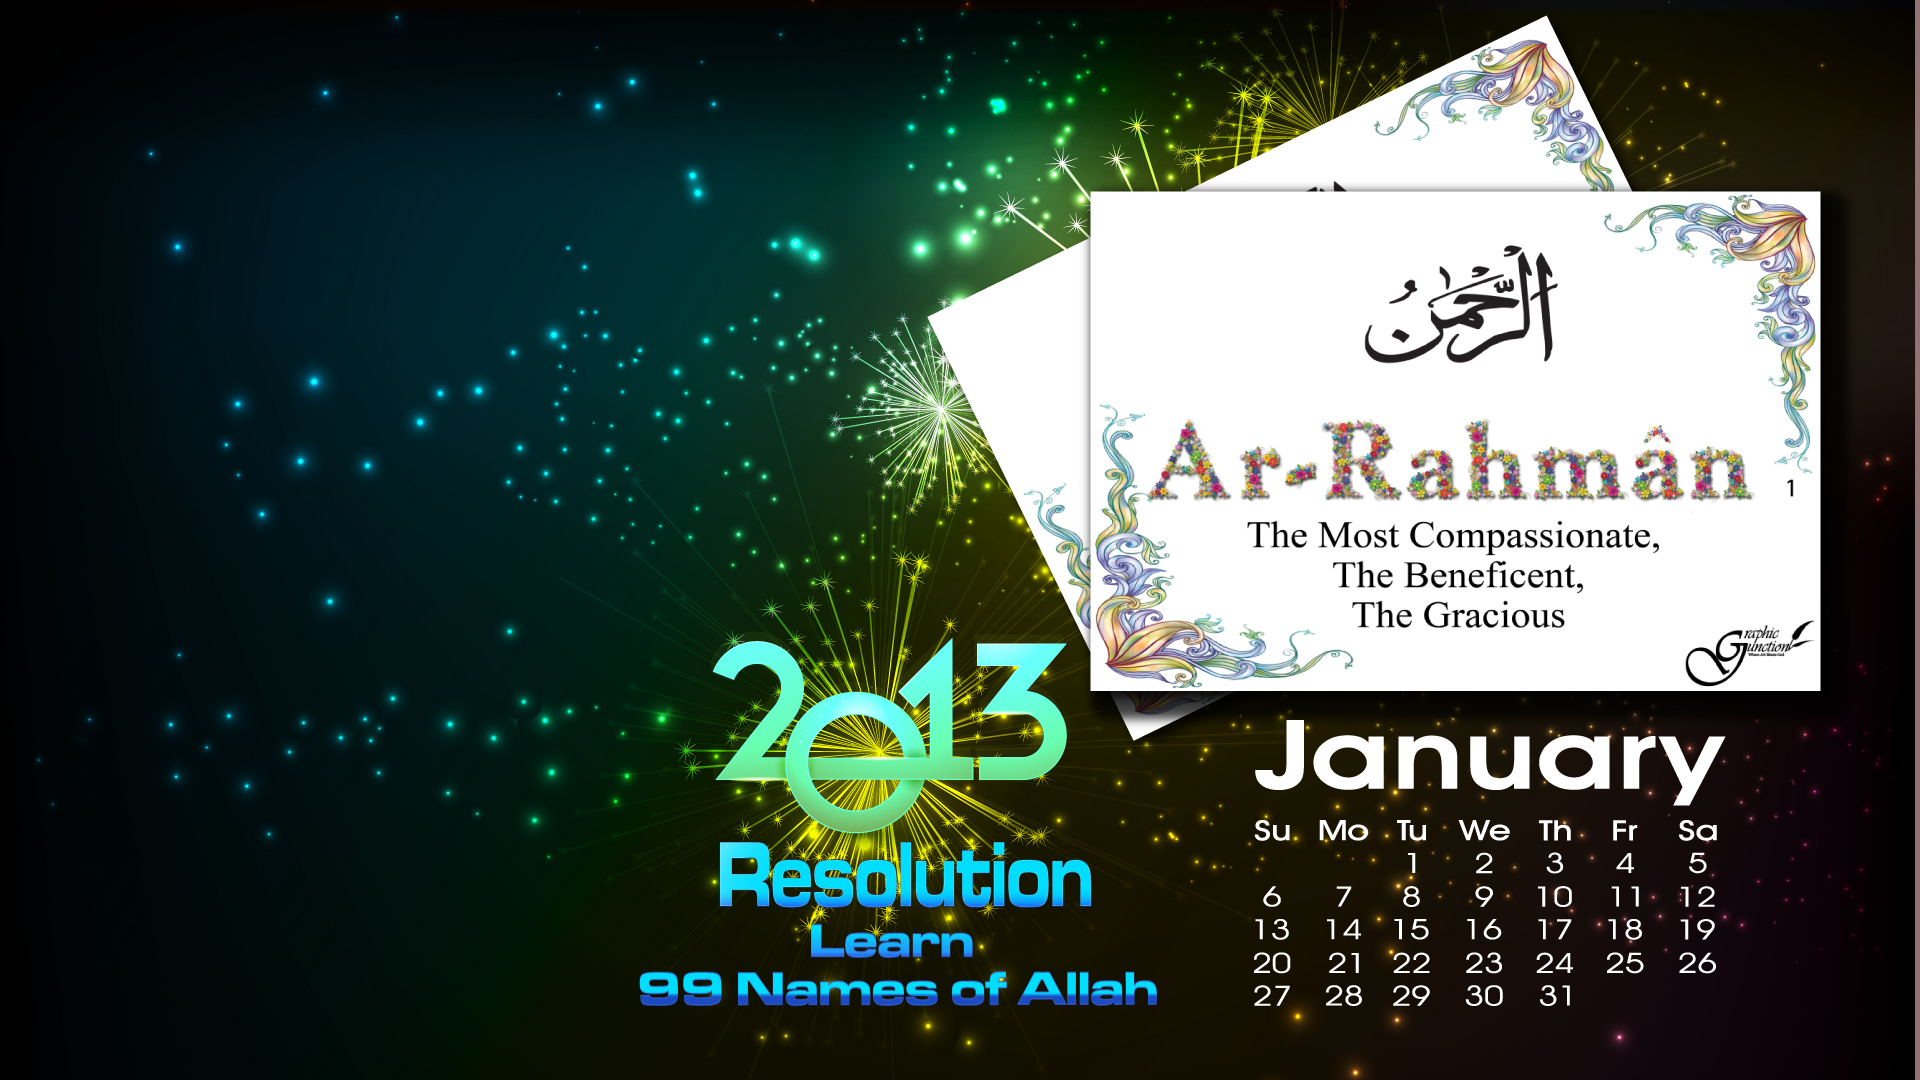 Allah Wallpaper - January 2013 - Join us to learn Allah's Names this year.  